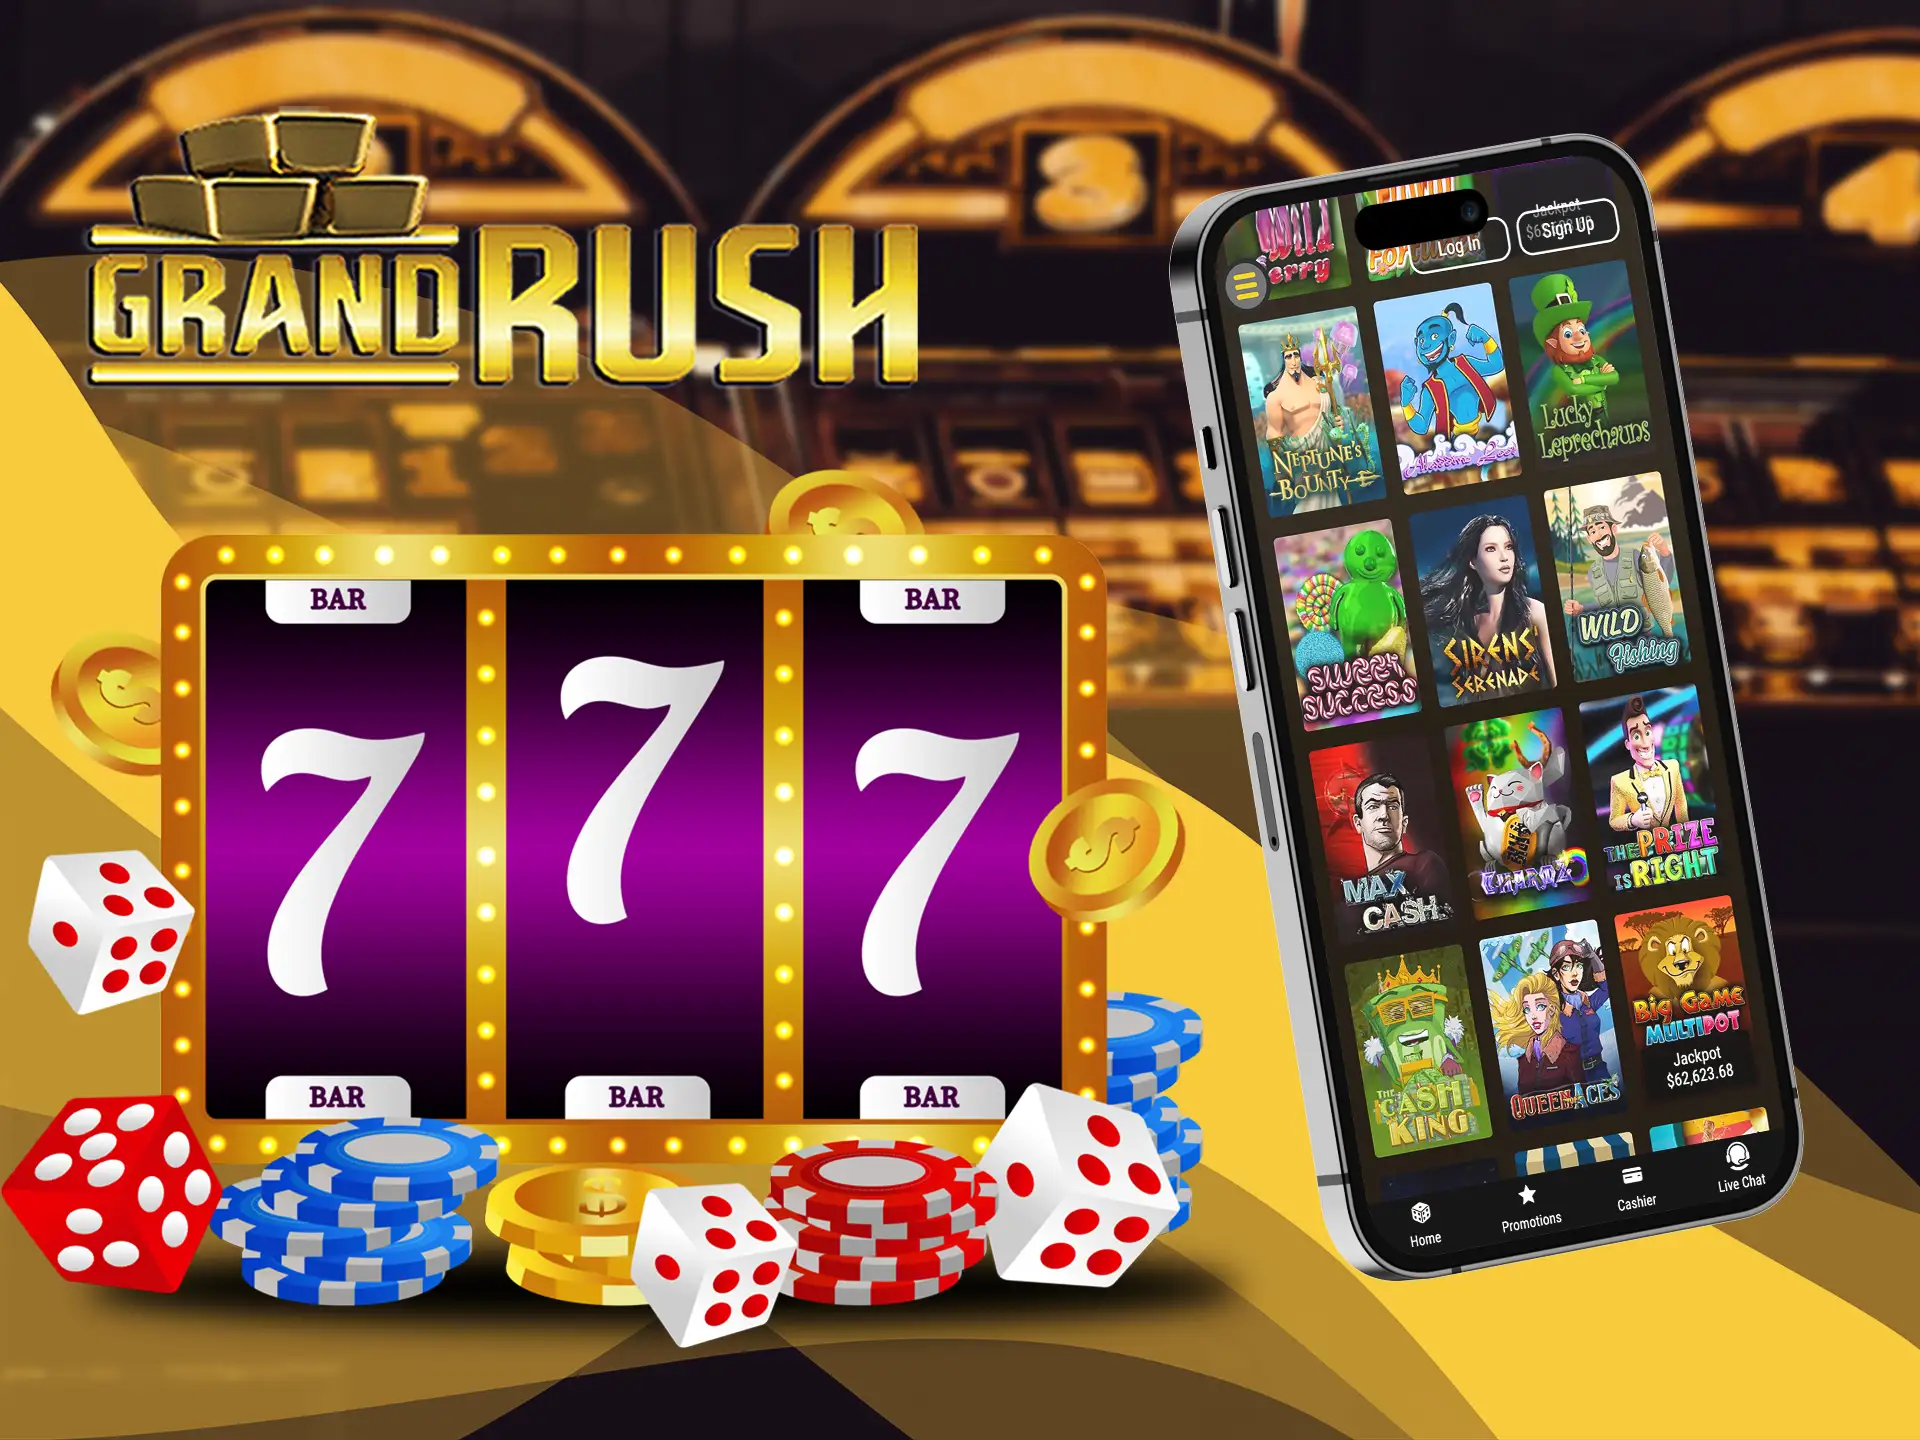 At Grand Rush online casino, there are hundreds of popular slot games.